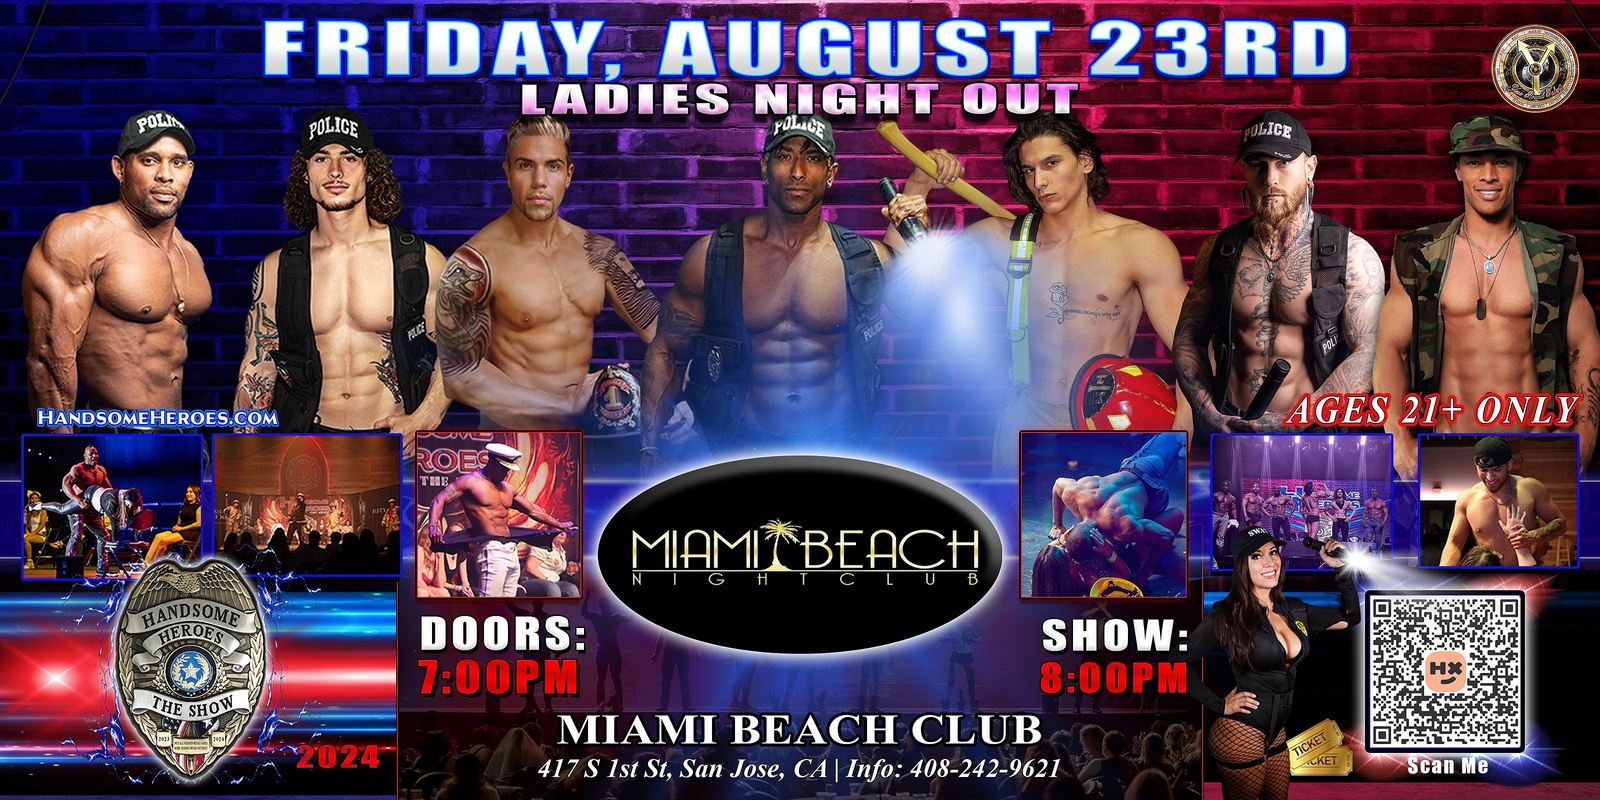 Banner image for San Jose, CA - Handsome Heroes: The Show @ Miami Beach Club! "Good Girls Go to Heaven, Bad Girls Leave in Handcuffs!"